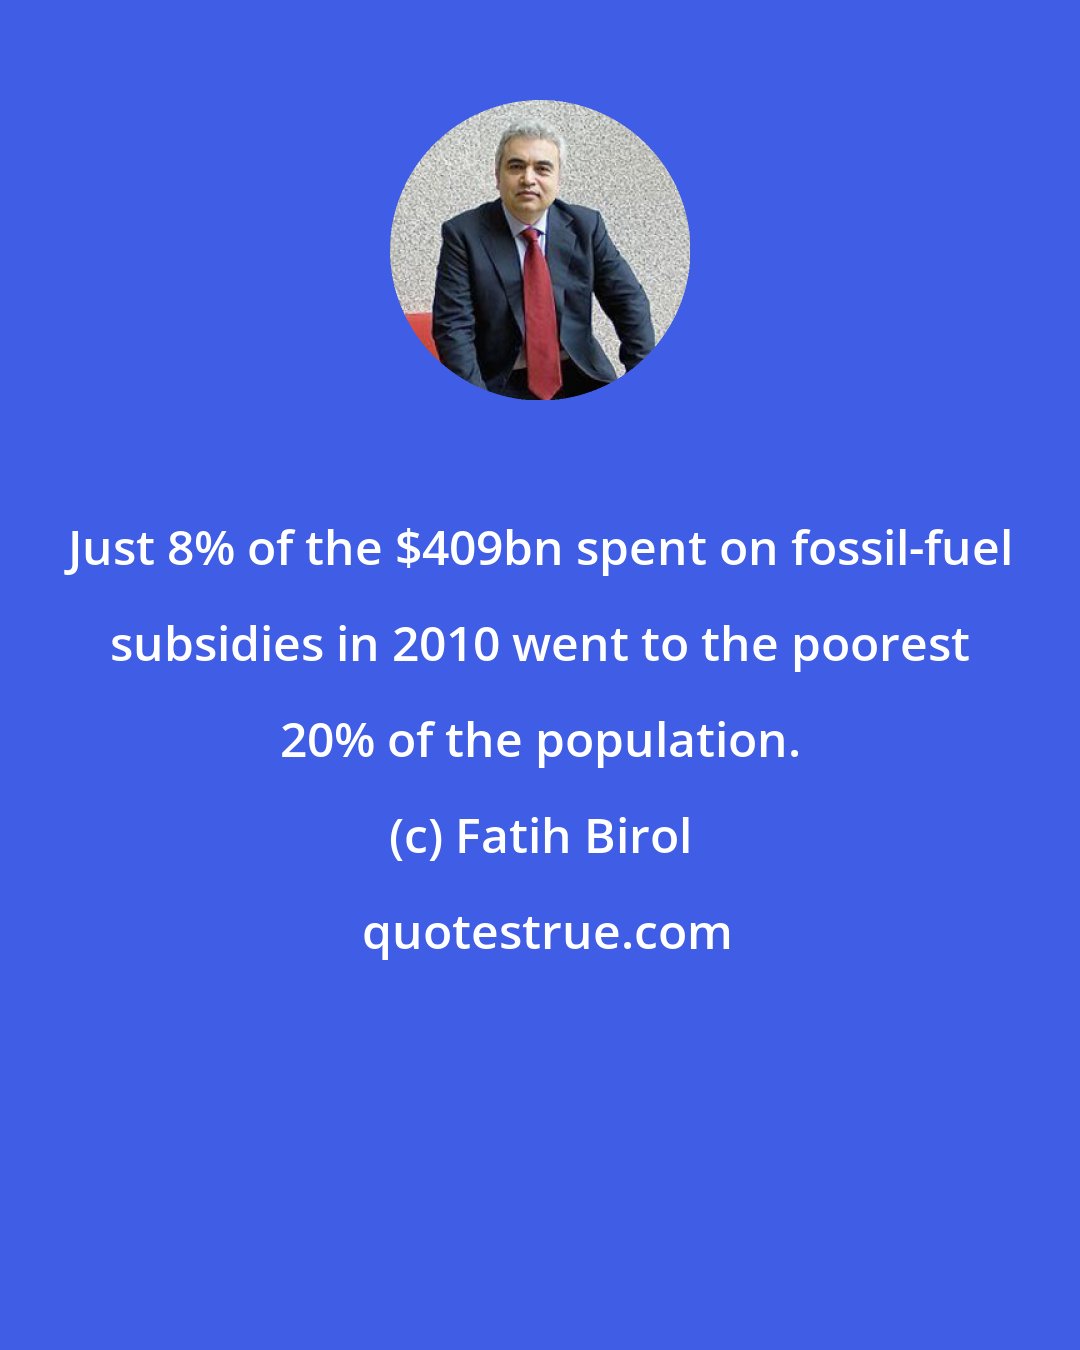 Fatih Birol: Just 8% of the $409bn spent on fossil-fuel subsidies in 2010 went to the poorest 20% of the population.